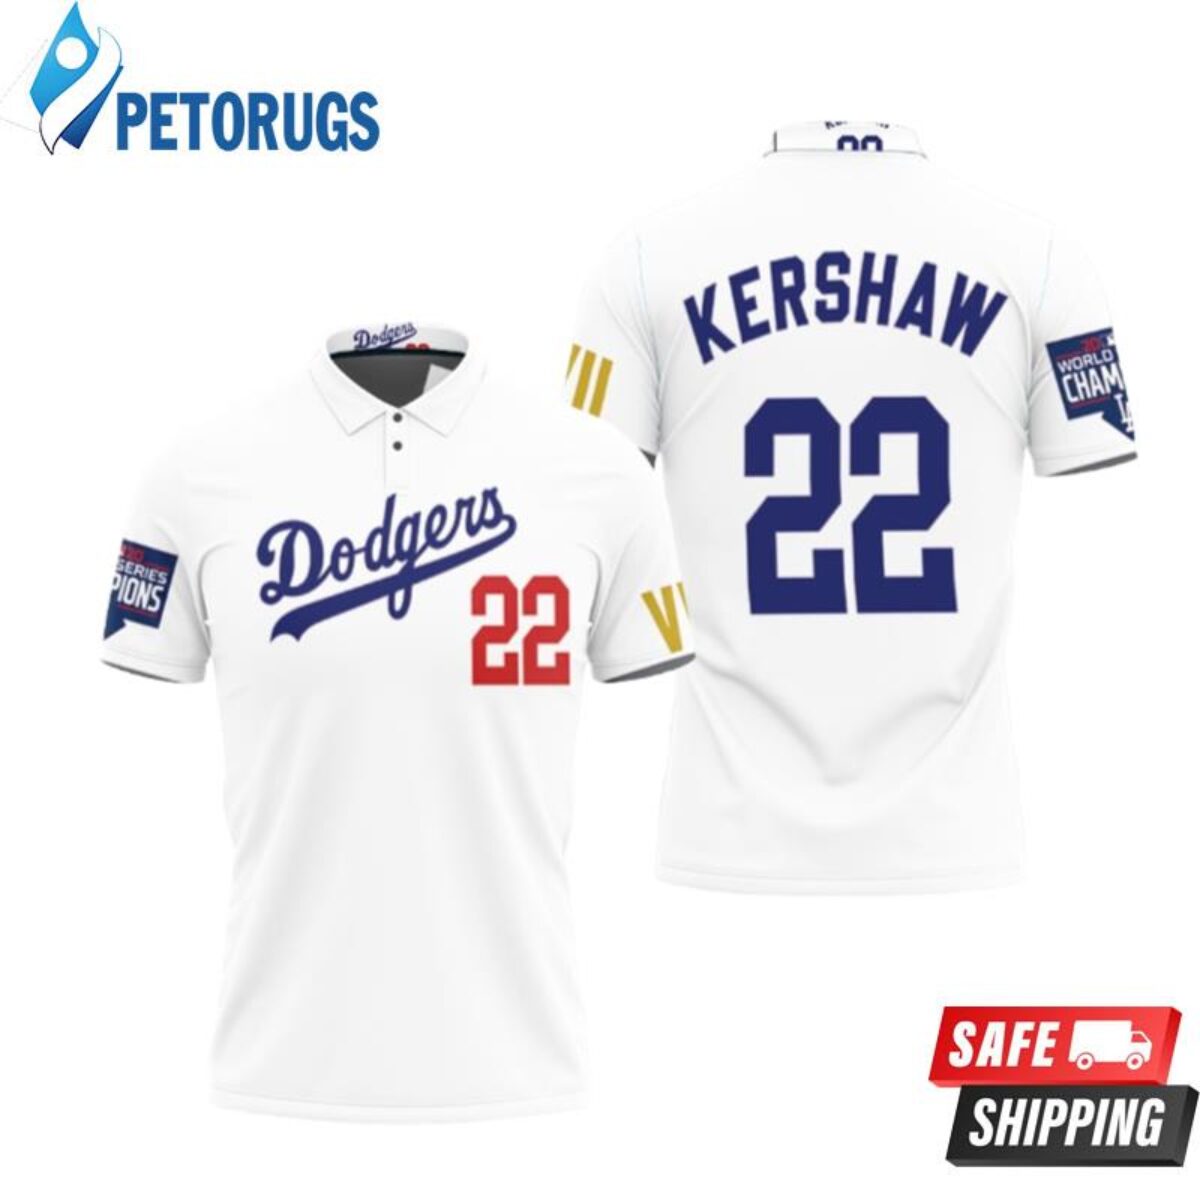 Design Los Angeles Dodgers Kershaw 22 2020 Championship Golden Edition White  Inspired Style Polo Shirts - Peto Rugs